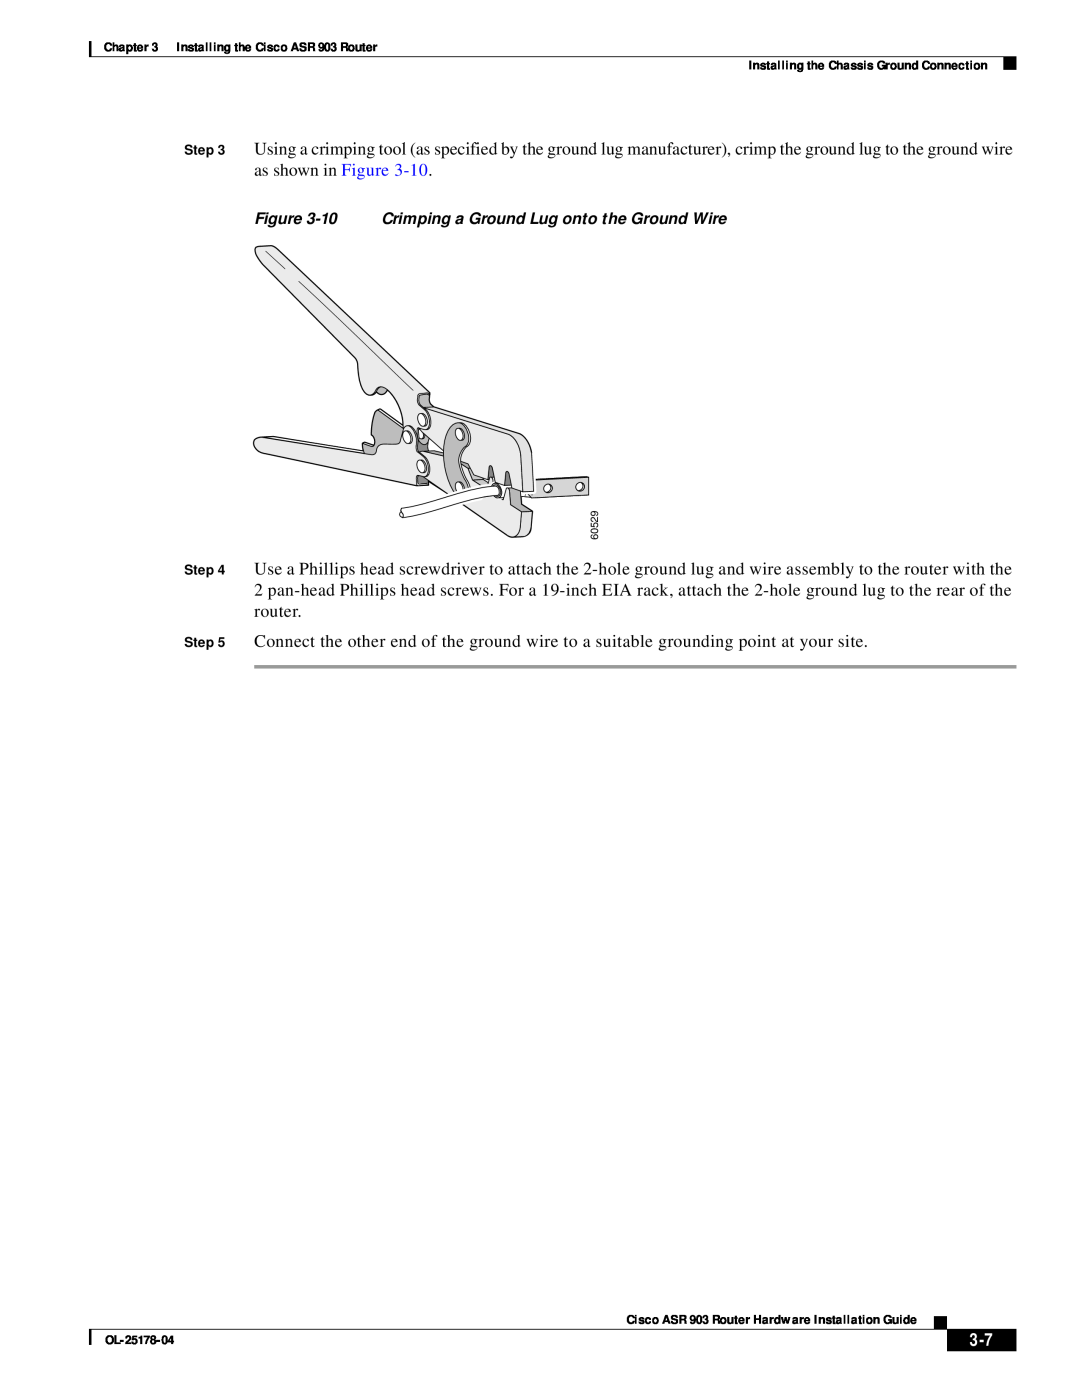 Cisco Systems ASR 903 manual 10 Crimping a Ground Lug onto the Ground Wire 